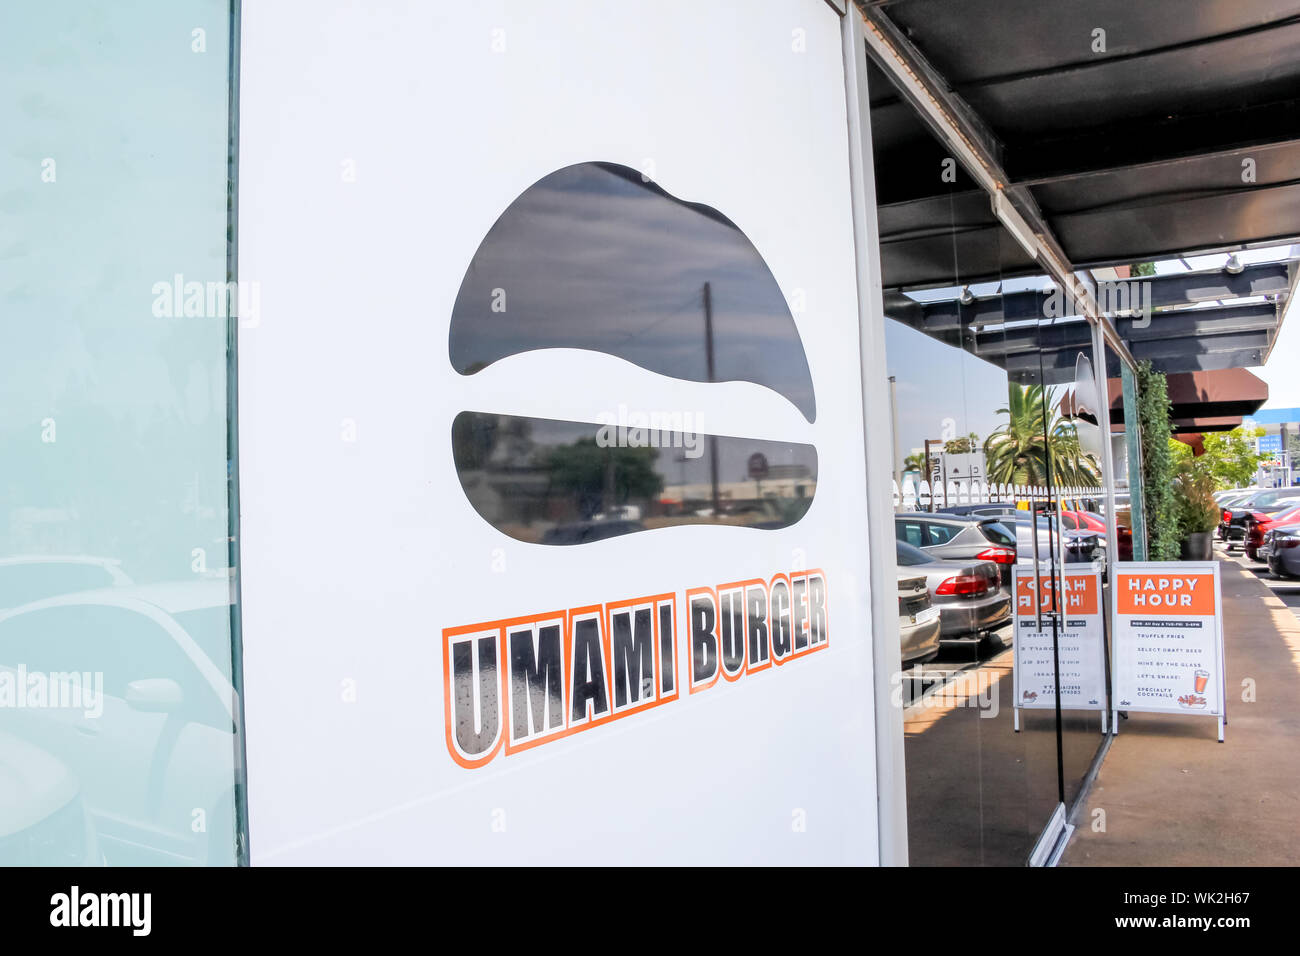 A store front sign for the gourmet burger chain known as Umami Burger, located at The Camp Stock Photo